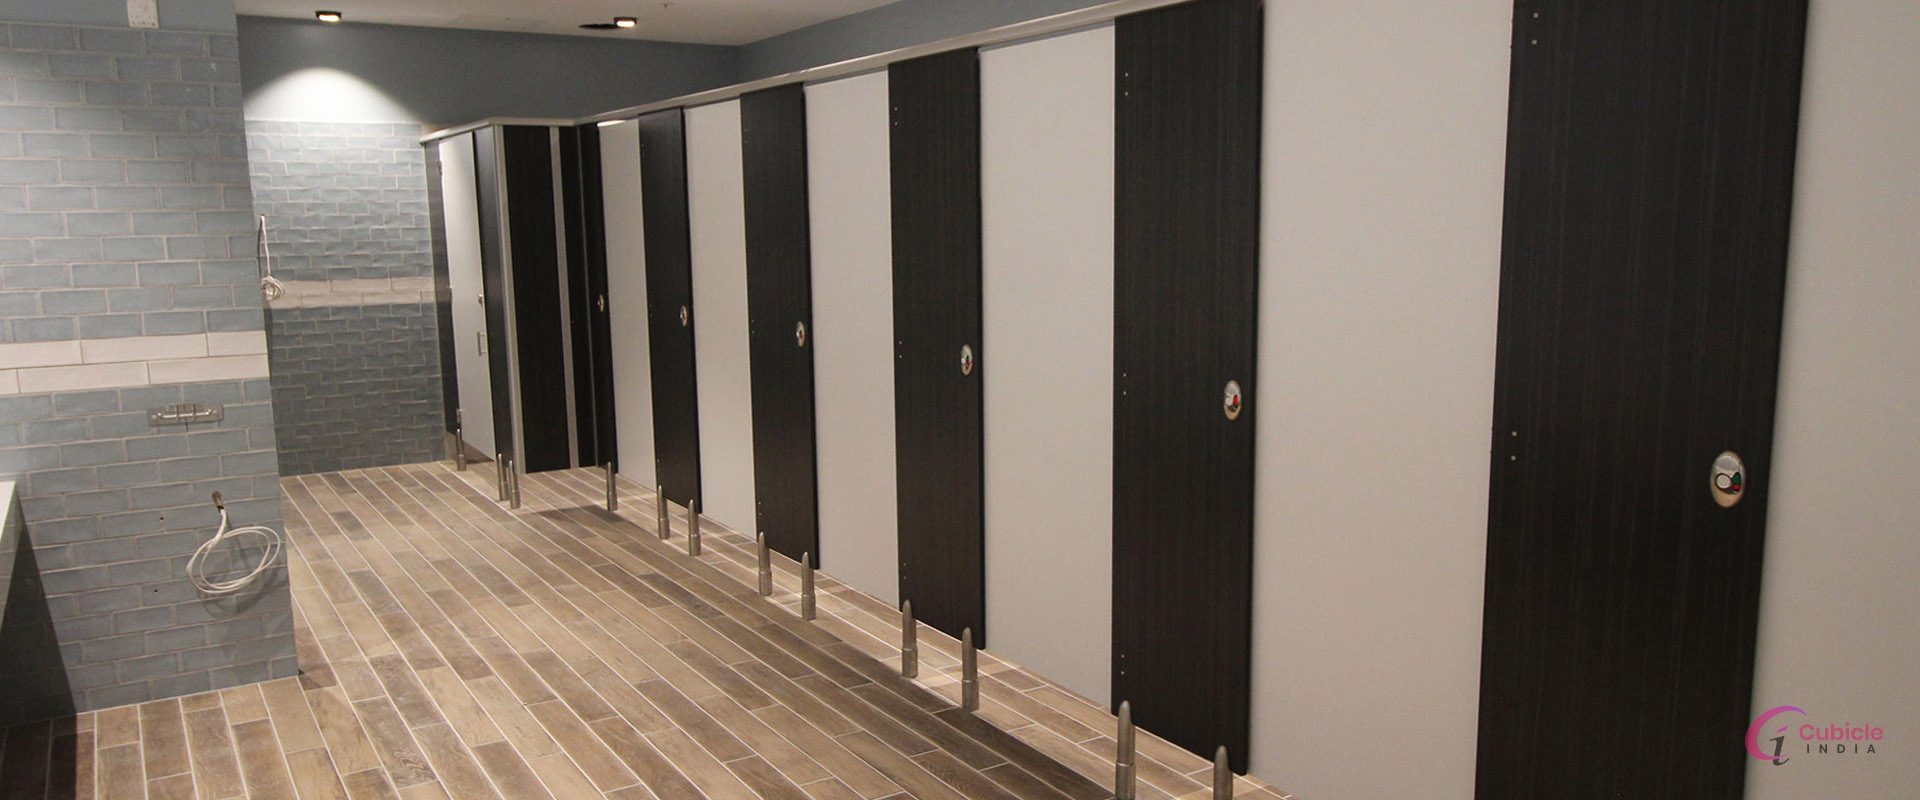 Office Toilet Cubicle Suppliers